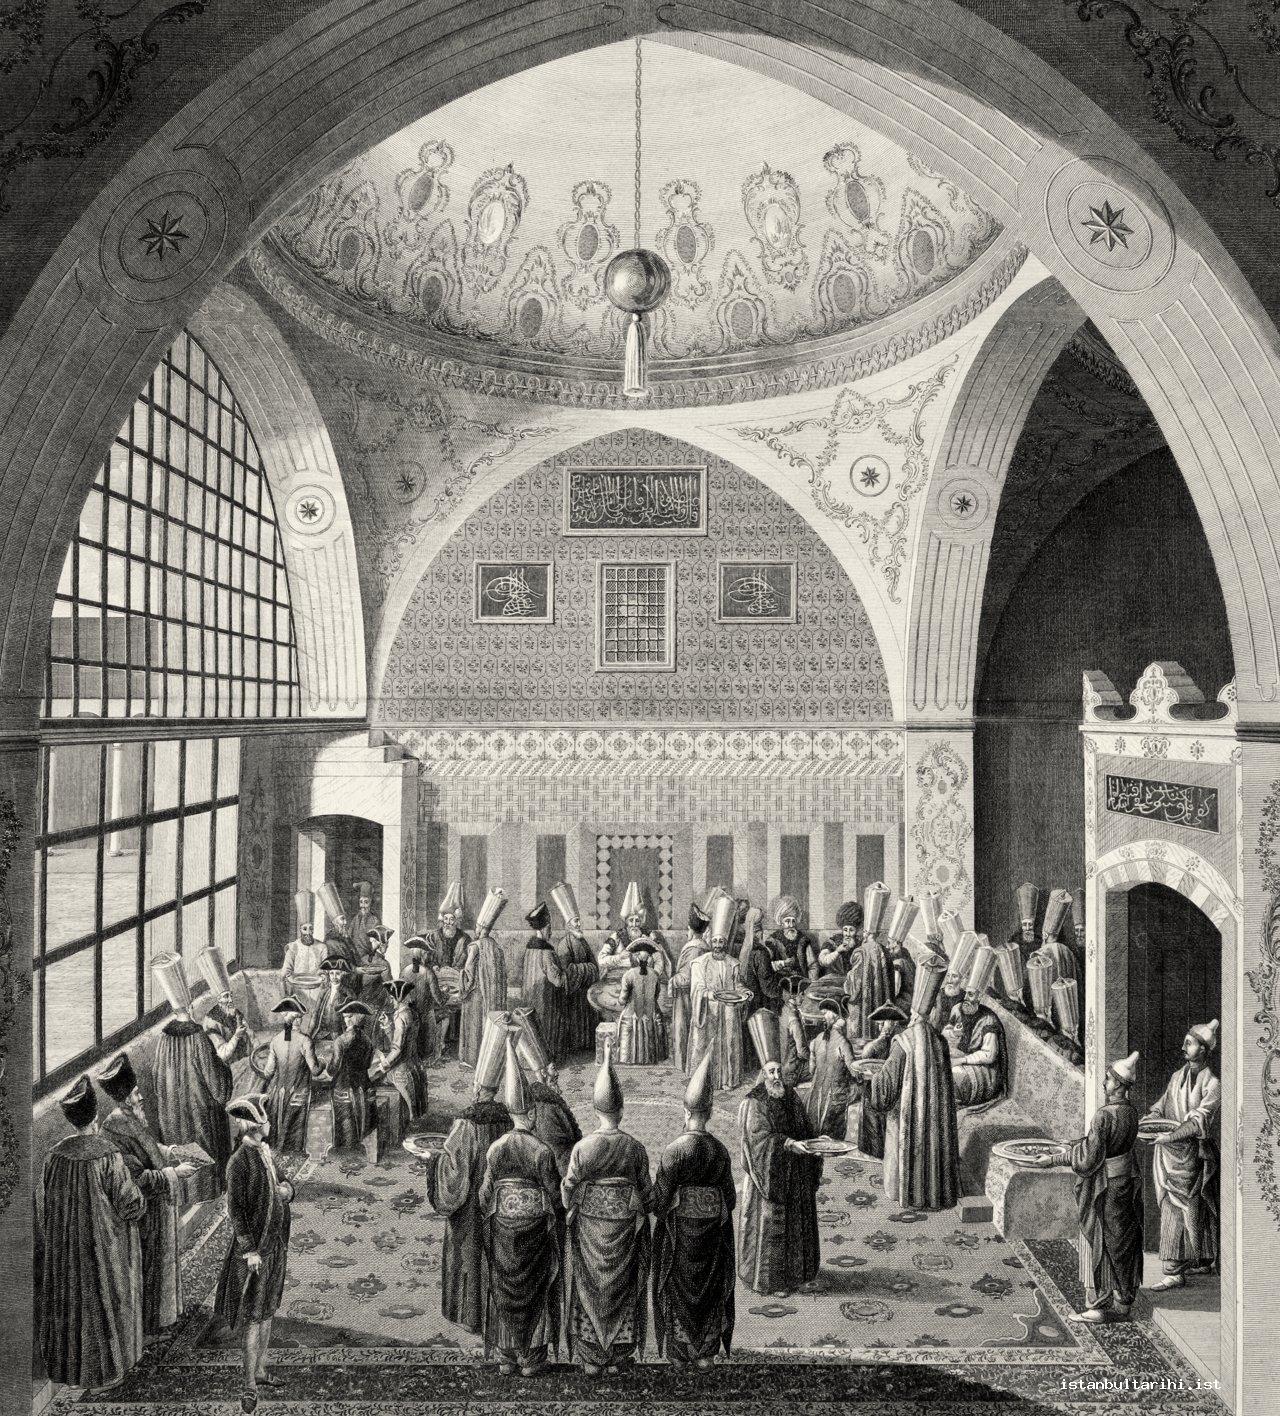 12- A banquet offered in Imperial Chancery of State in honor of an ambassador (d’Ohsson)